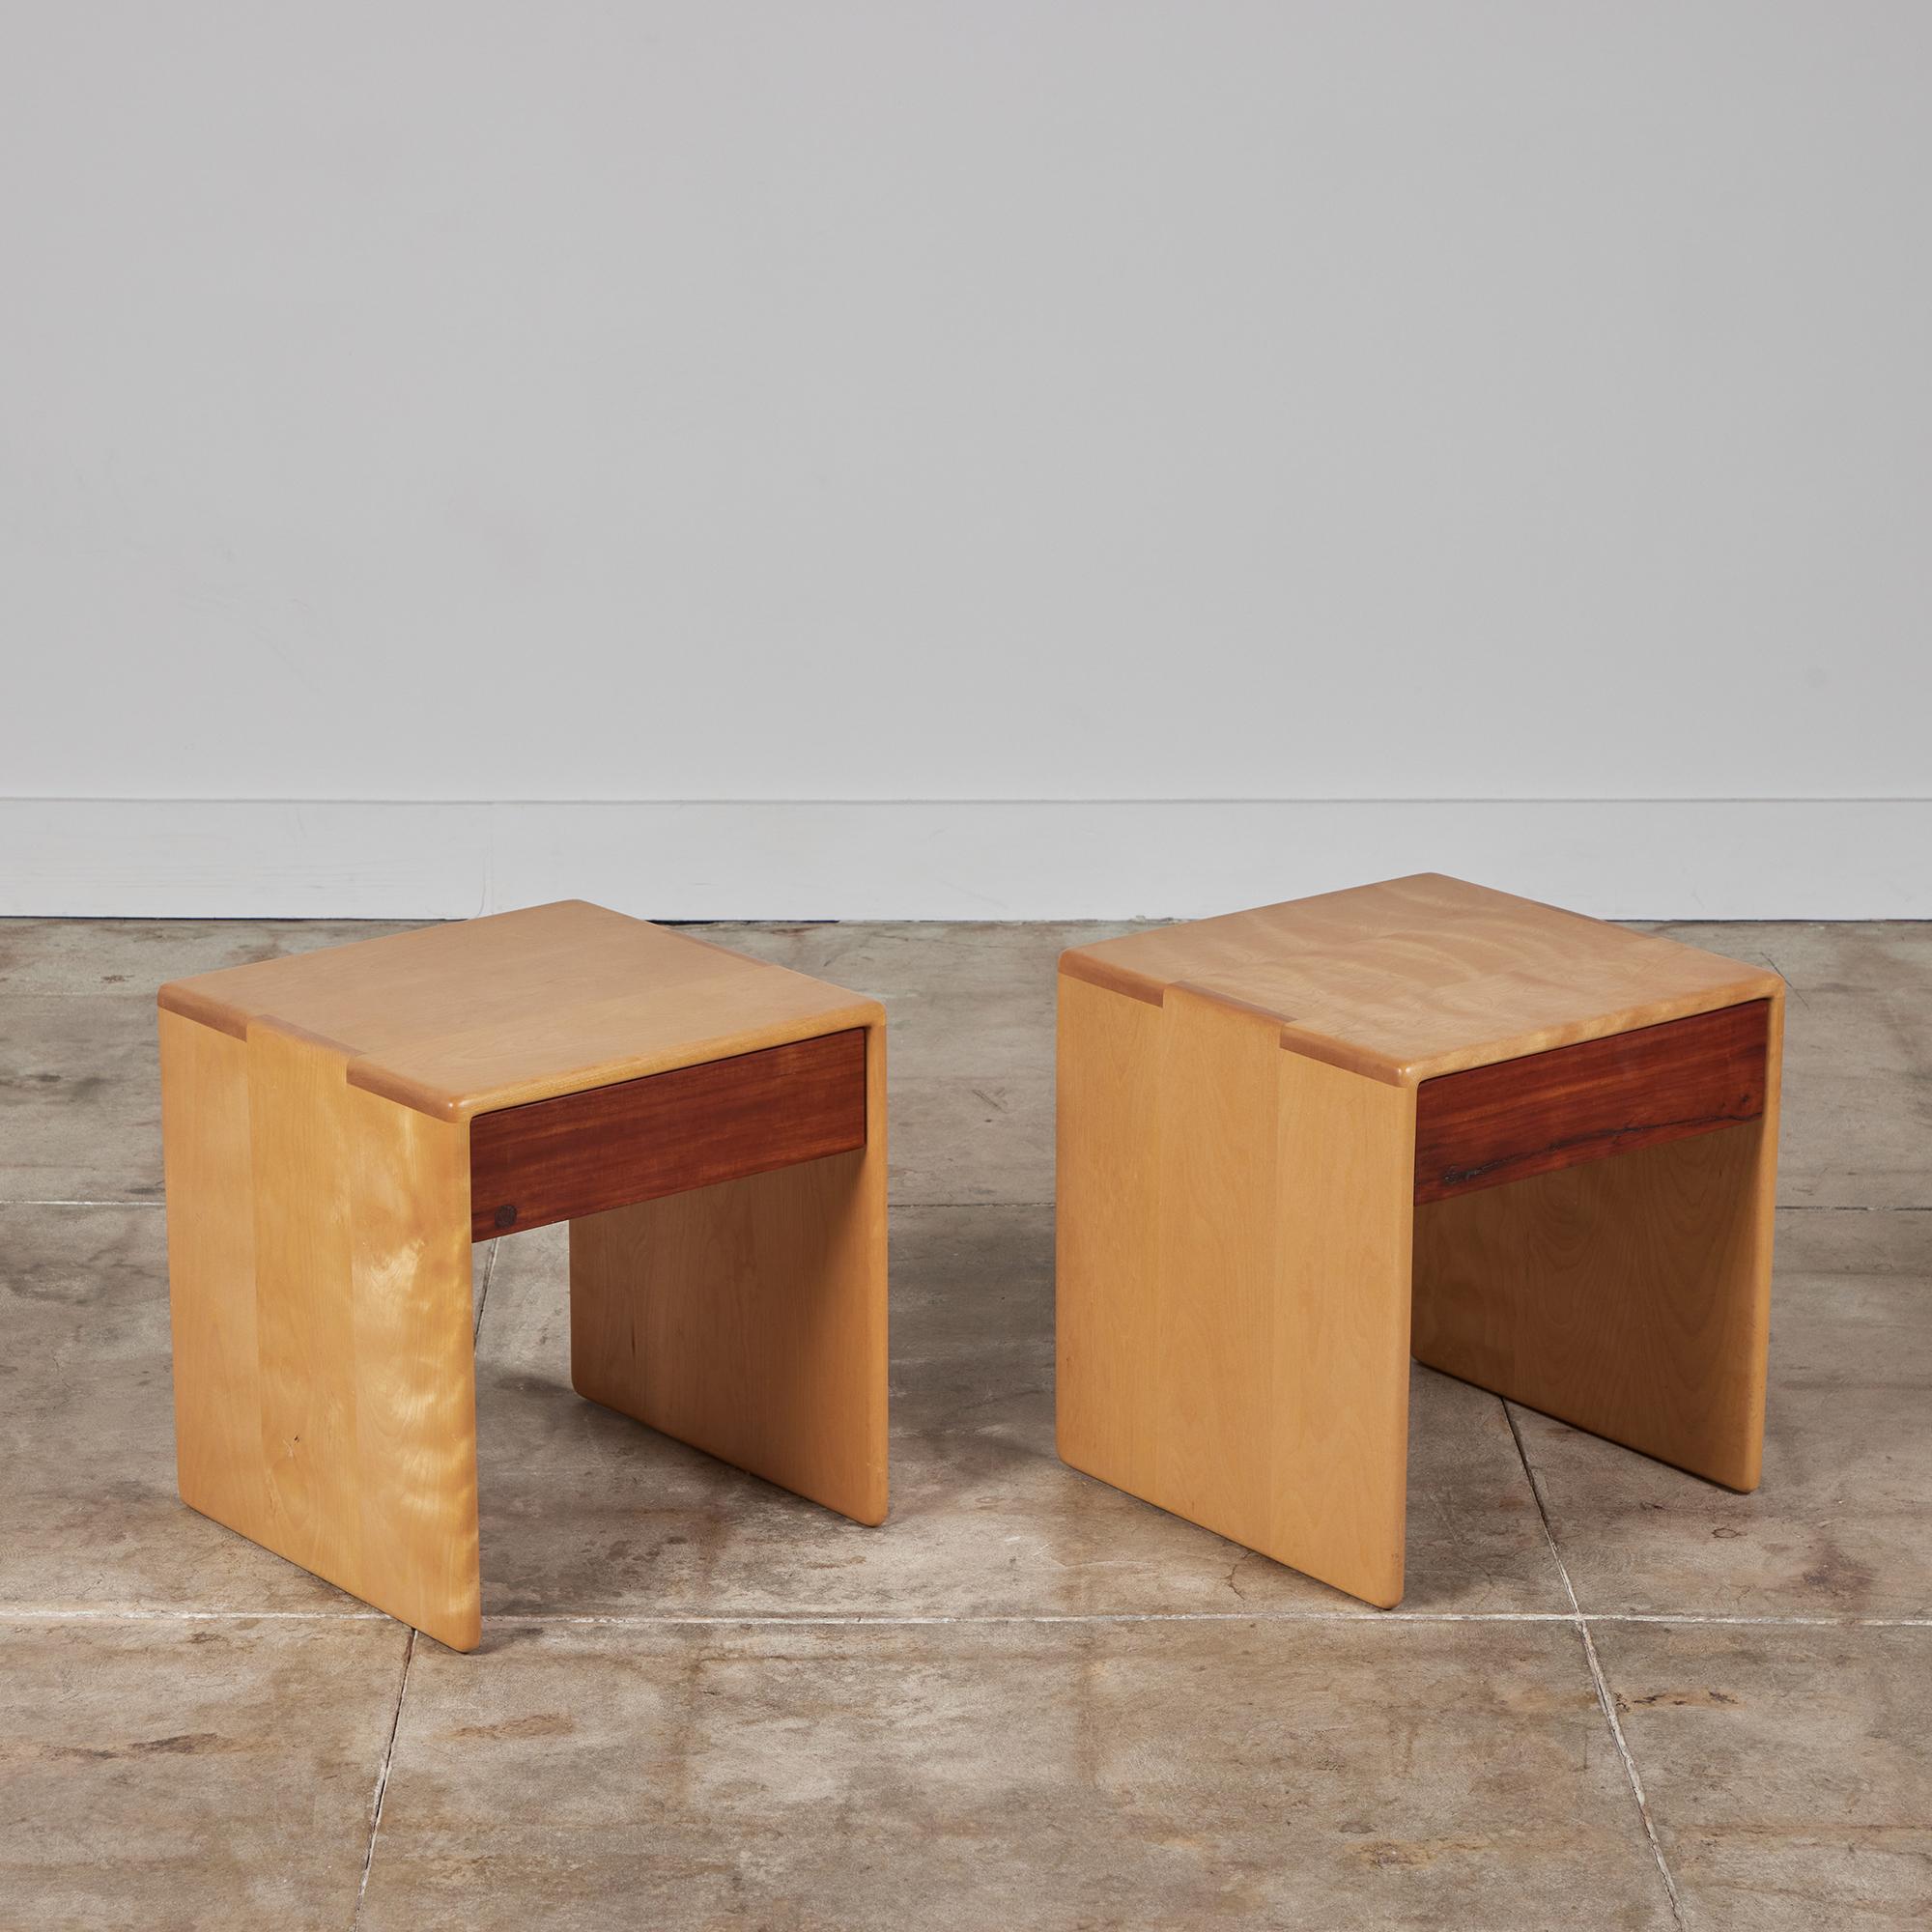 Nightstands by Gerald McCabe for Eon Furniture, c.1997, USA. The nightstands feature a maple surface and waterfall sides with beautiful finger joinery. The flat drawer fronts showcase shedua wood.

Dimensions
17